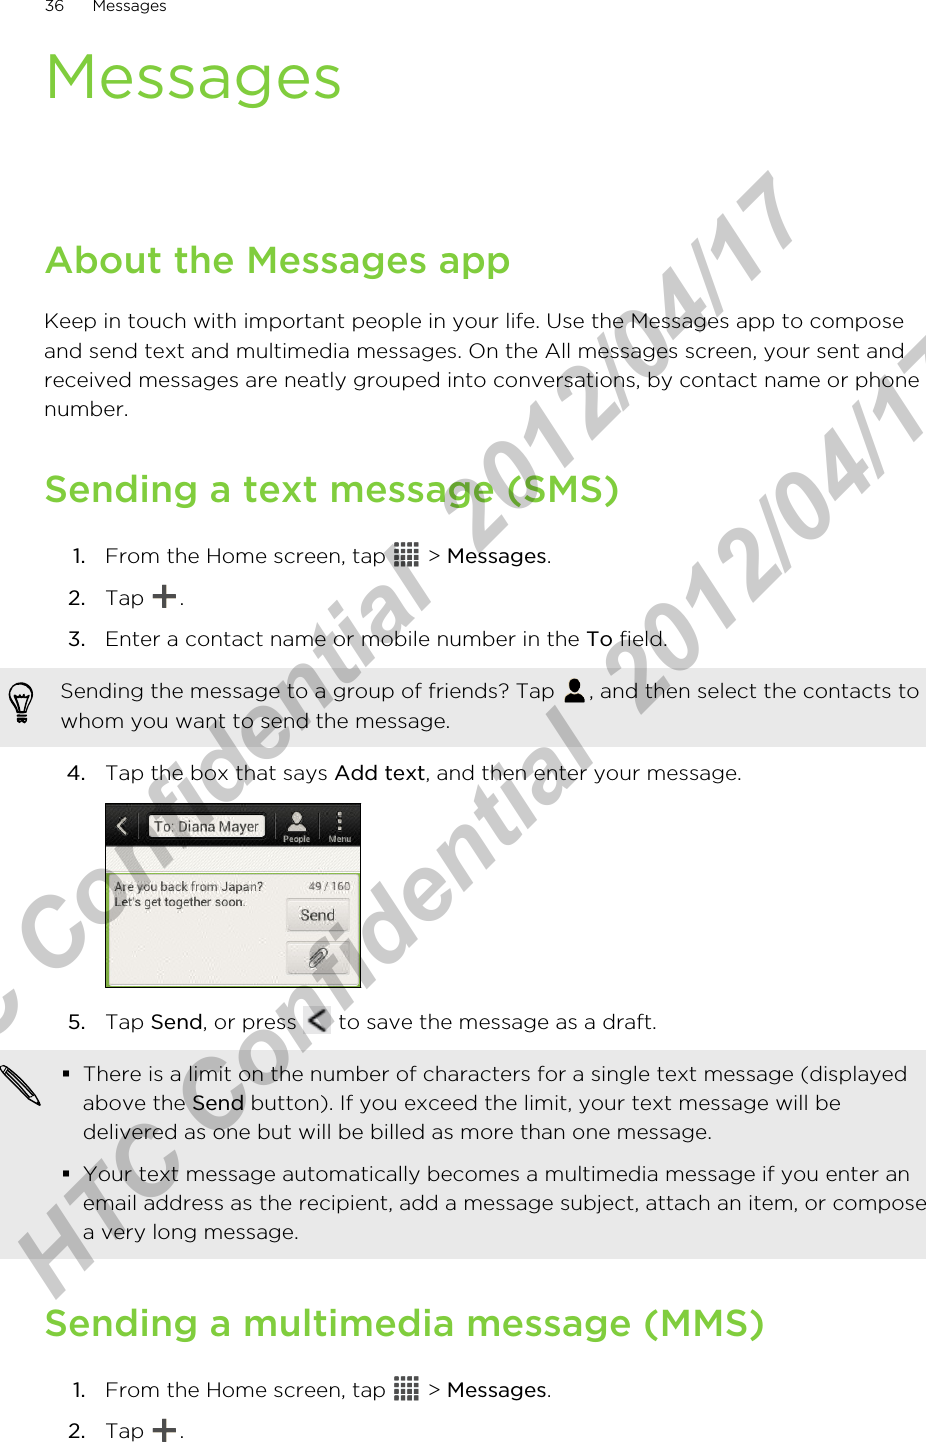 MessagesAbout the Messages appKeep in touch with important people in your life. Use the Messages app to composeand send text and multimedia messages. On the All messages screen, your sent andreceived messages are neatly grouped into conversations, by contact name or phonenumber.Sending a text message (SMS)1. From the Home screen, tap   &gt; Messages.2. Tap  .3. Enter a contact name or mobile number in the To field. Sending the message to a group of friends? Tap  , and then select the contacts towhom you want to send the message.4. Tap the box that says Add text, and then enter your message. 5. Tap Send, or press   to save the message as a draft. §There is a limit on the number of characters for a single text message (displayedabove the Send button). If you exceed the limit, your text message will bedelivered as one but will be billed as more than one message.§Your text message automatically becomes a multimedia message if you enter anemail address as the recipient, add a message subject, attach an item, or composea very long message.Sending a multimedia message (MMS)1. From the Home screen, tap   &gt; Messages.2. Tap  .36 MessagesHTC Confidential  2012/04/17  HTC Confidential  2012/04/17 